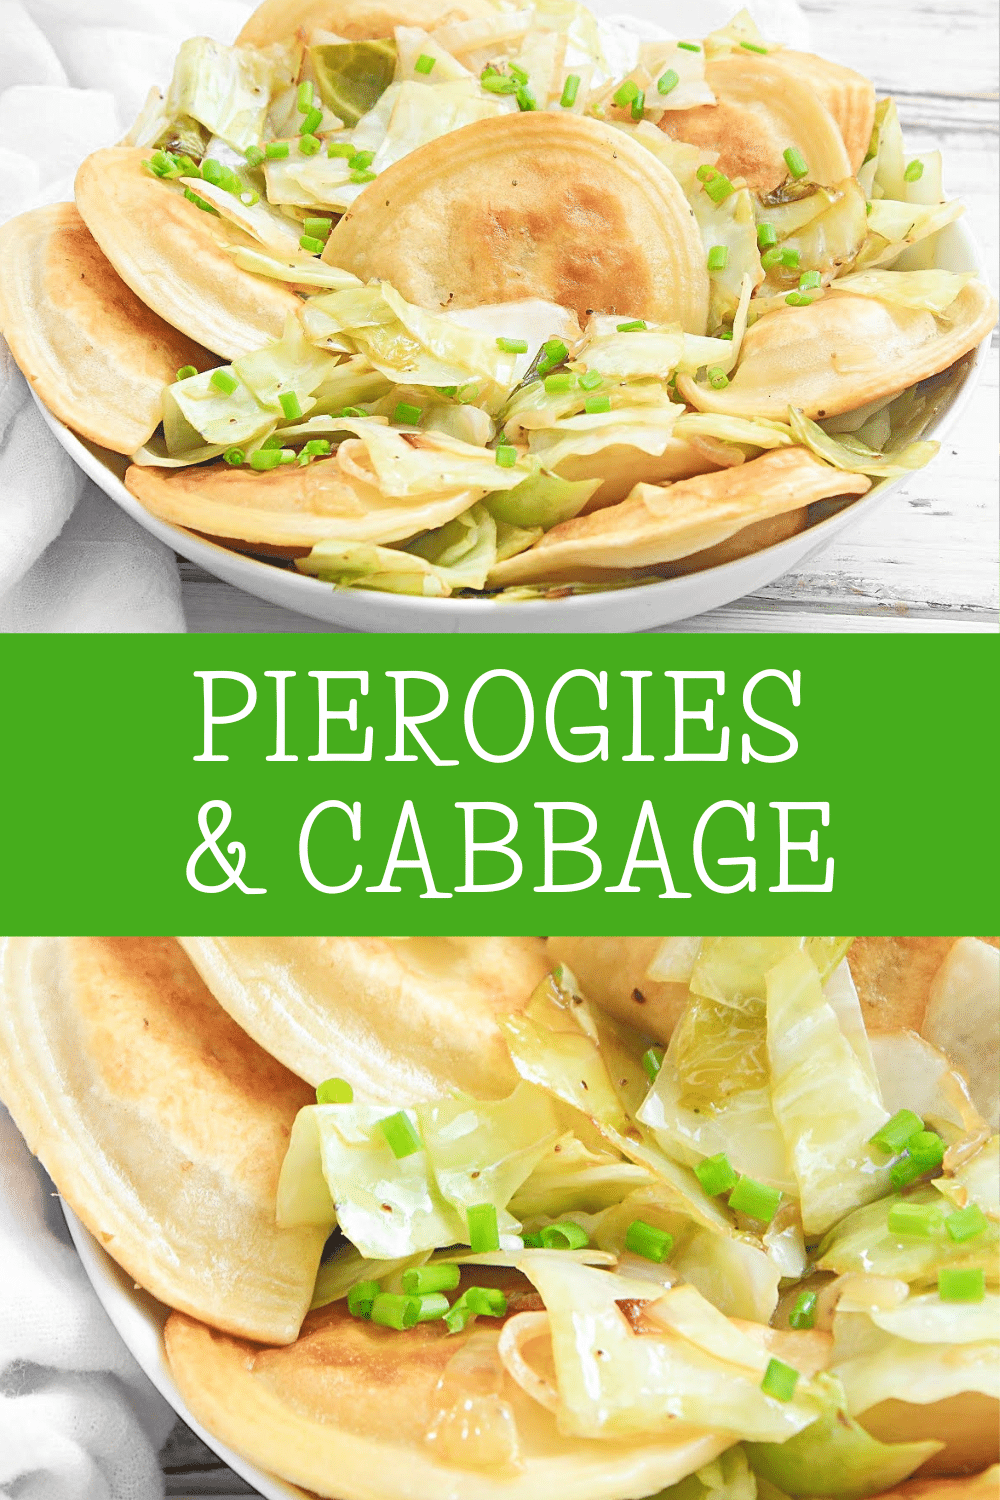 Pierogies and Cabbage ~ Pan-fried pierogies with caramelized cabbage and onions. This one-skillet meal is ready to serve in just 20 minutes! via @thiswifecooks